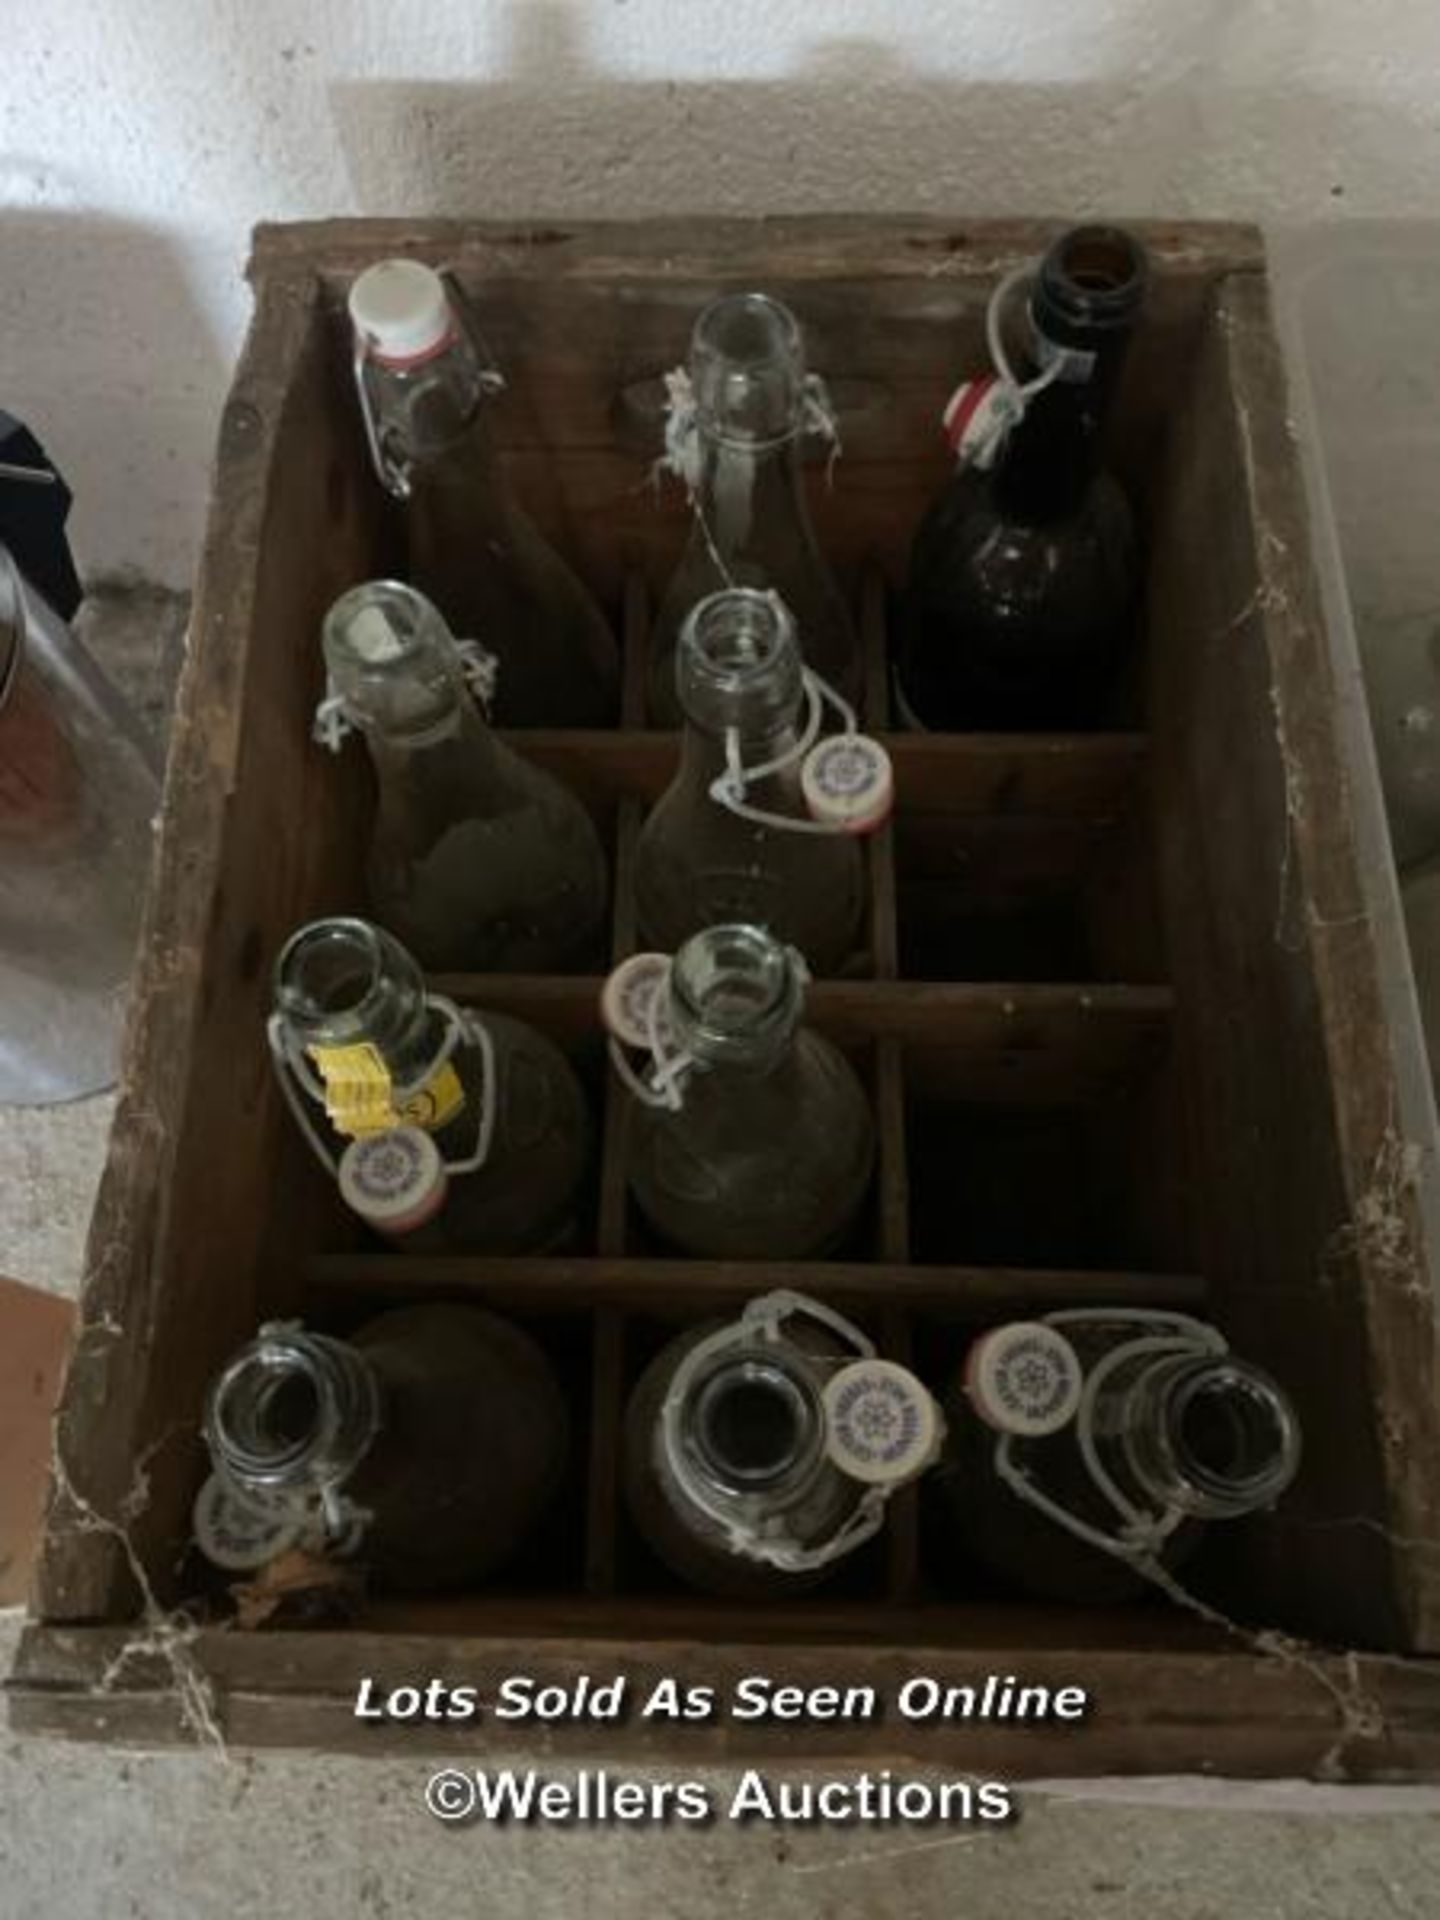 2X CRATES OF VINTAGE GLASS BOTTLES, ONE CRATE IS WATNEY MAN BRIGHTON - Image 2 of 3